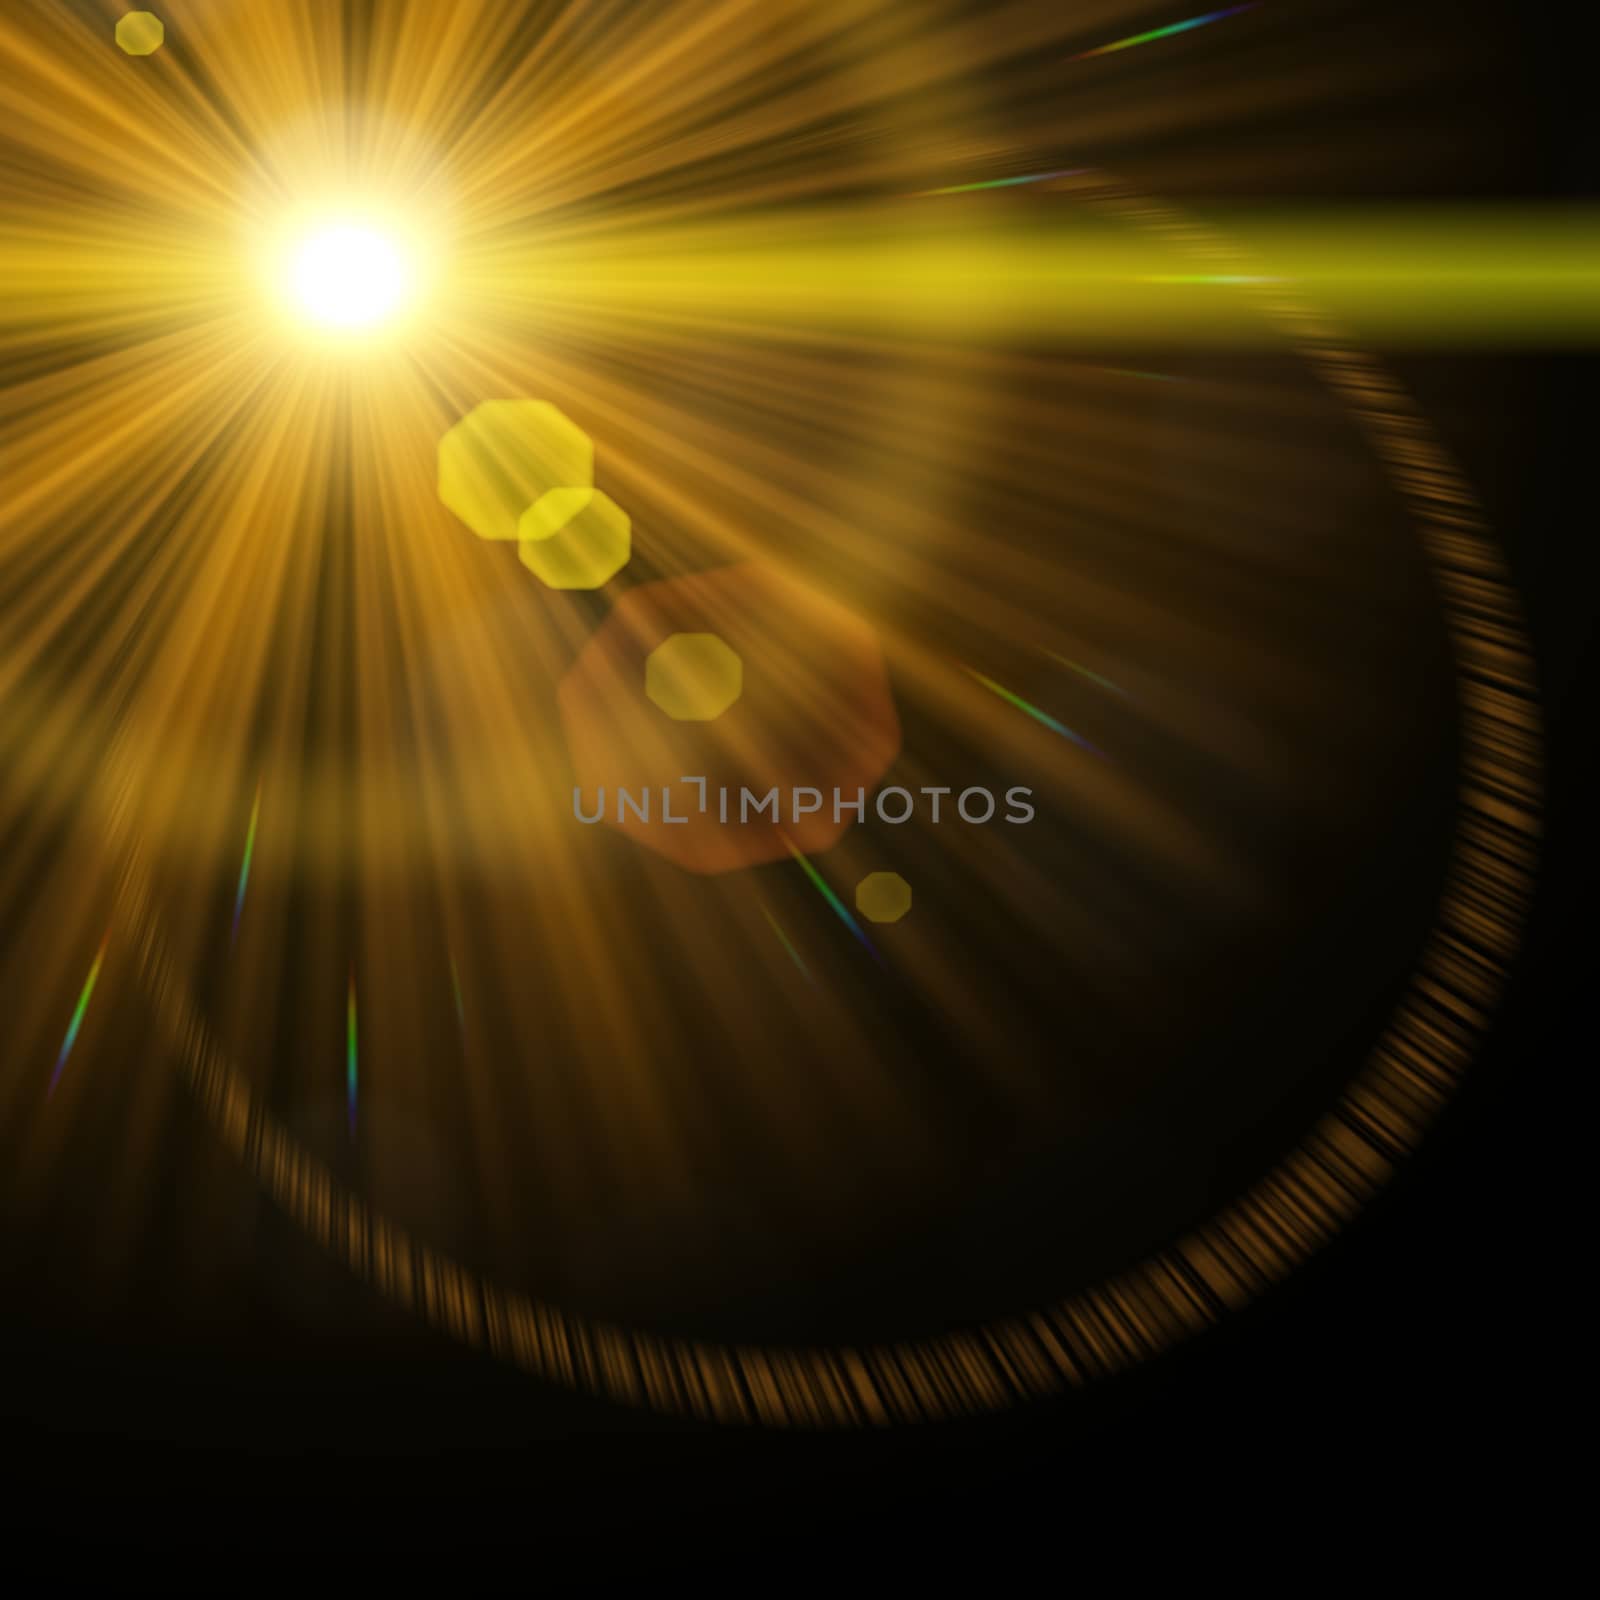 An image of a decorative lens flare background